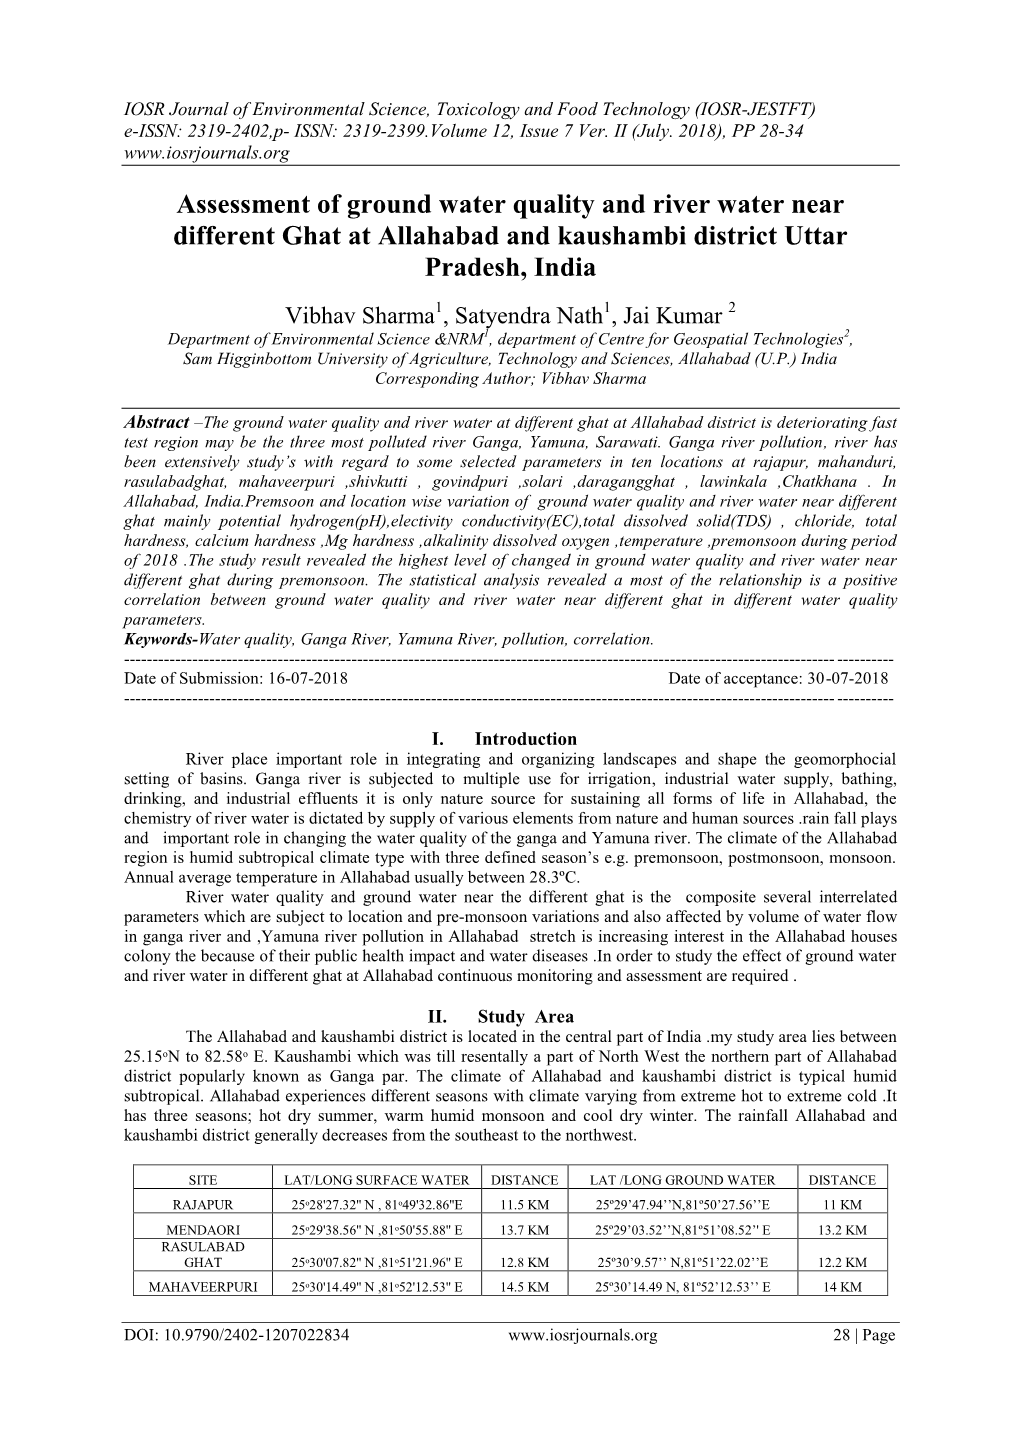 Assessment of Ground Water Quality and River Water Near Different Ghat at Allahabad and Kaushambi District Uttar Pradesh, India